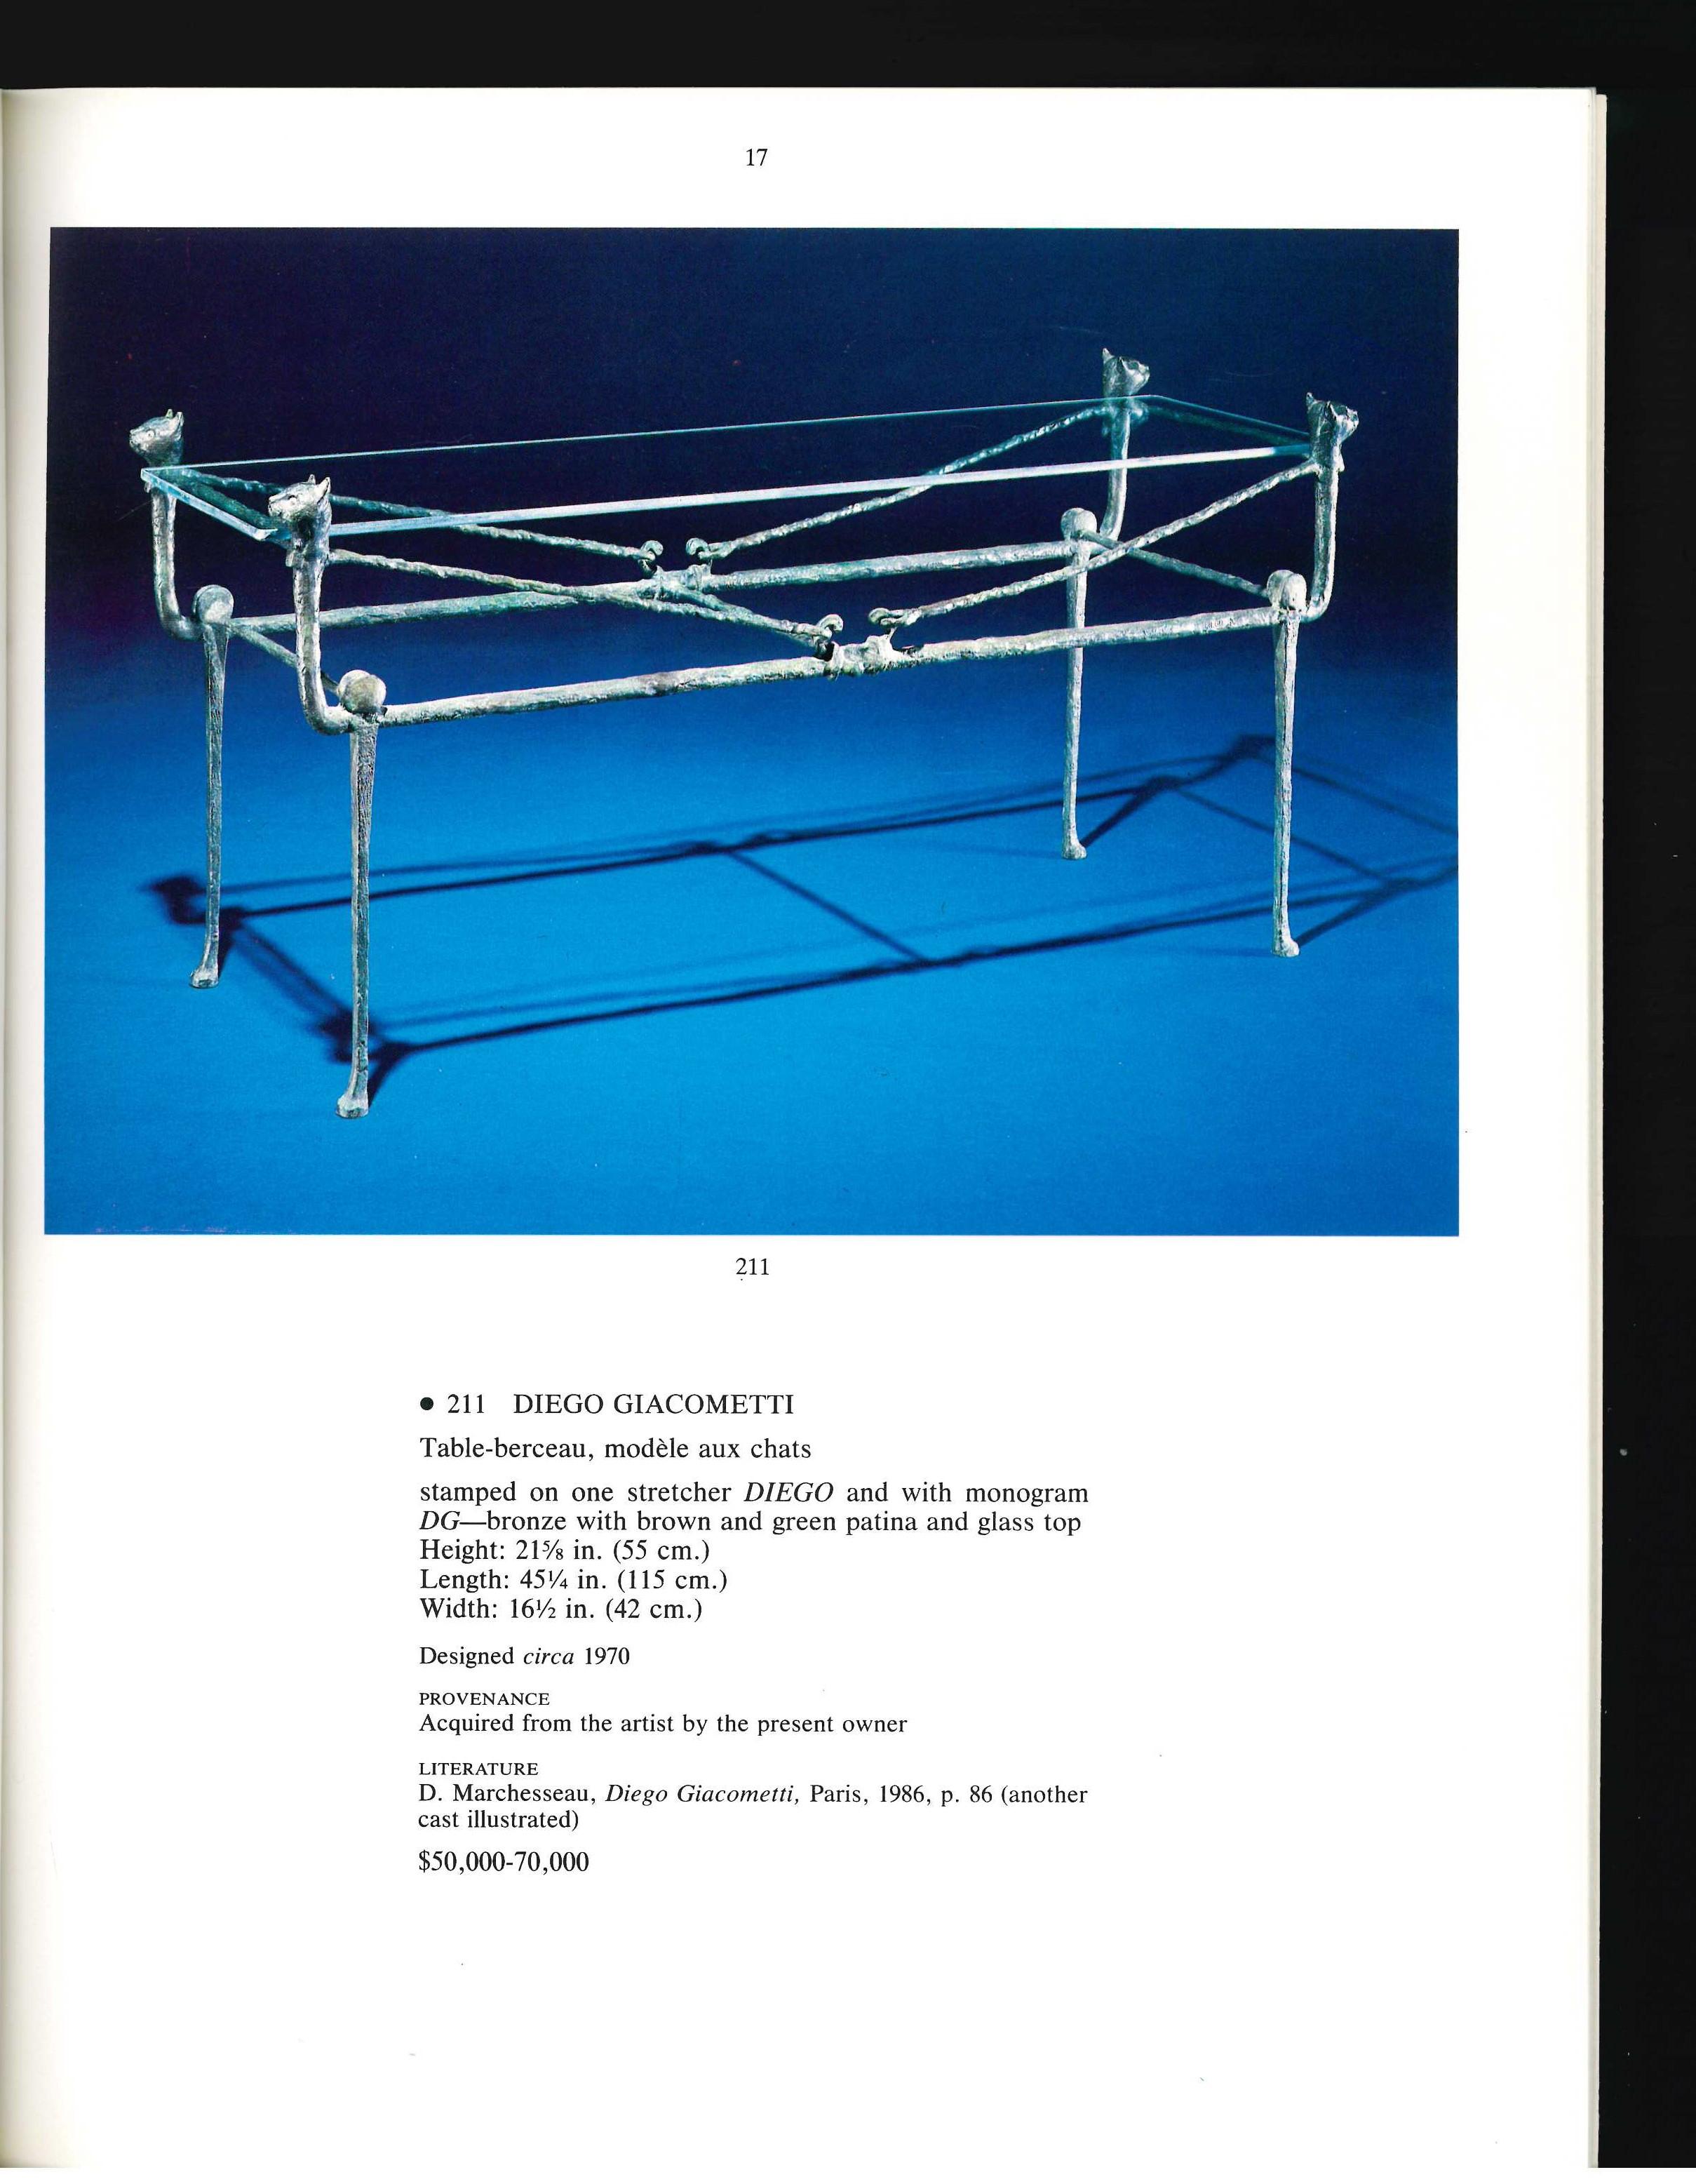 Paper Furniture & Decorative Works of Art by A and D Giacometti (Book) For Sale